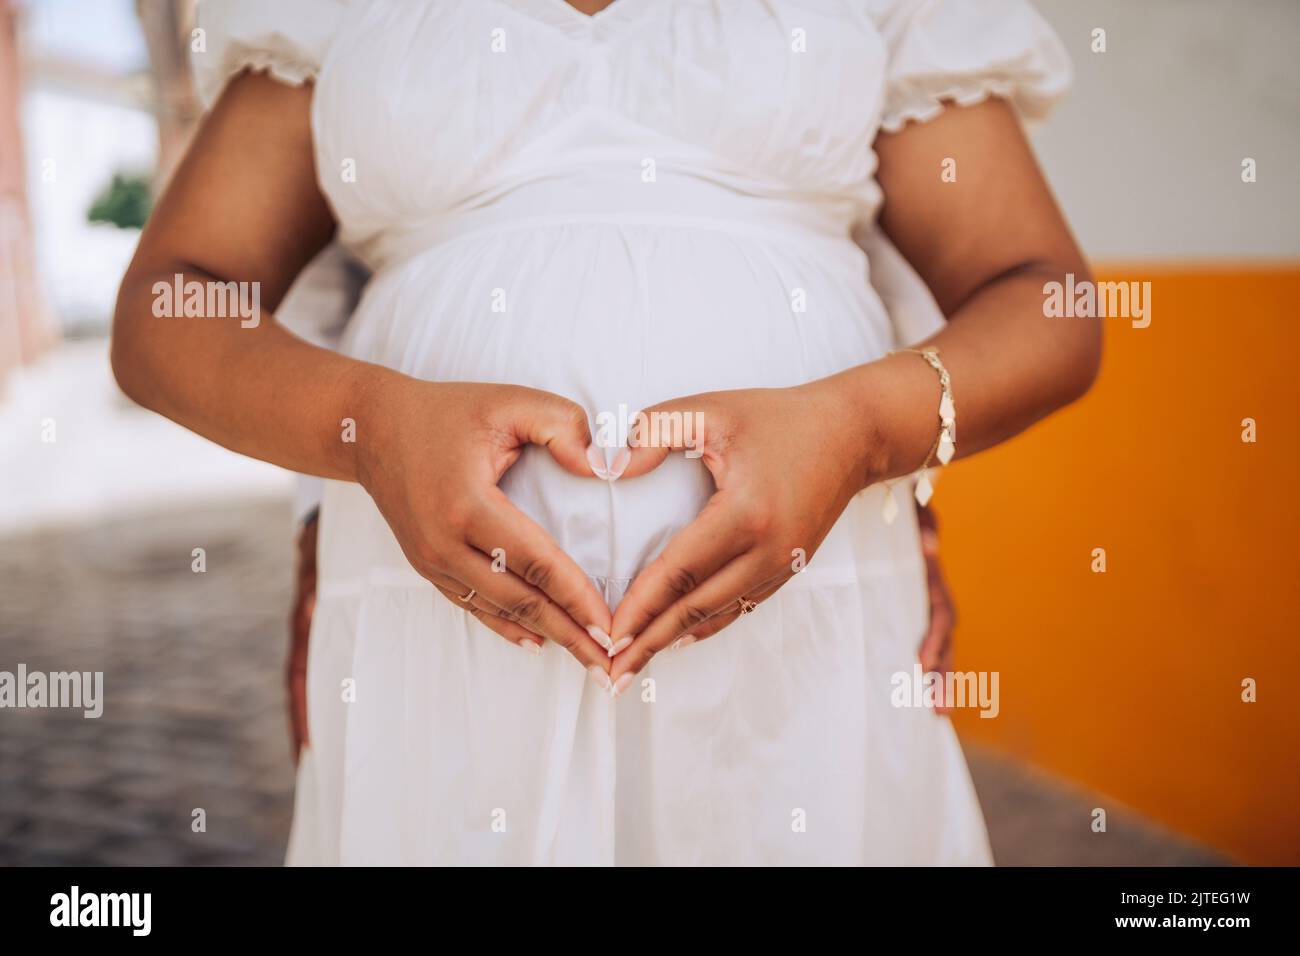 Pregnant woman showing heart shape at her tummy with her partner behind Stock Photo